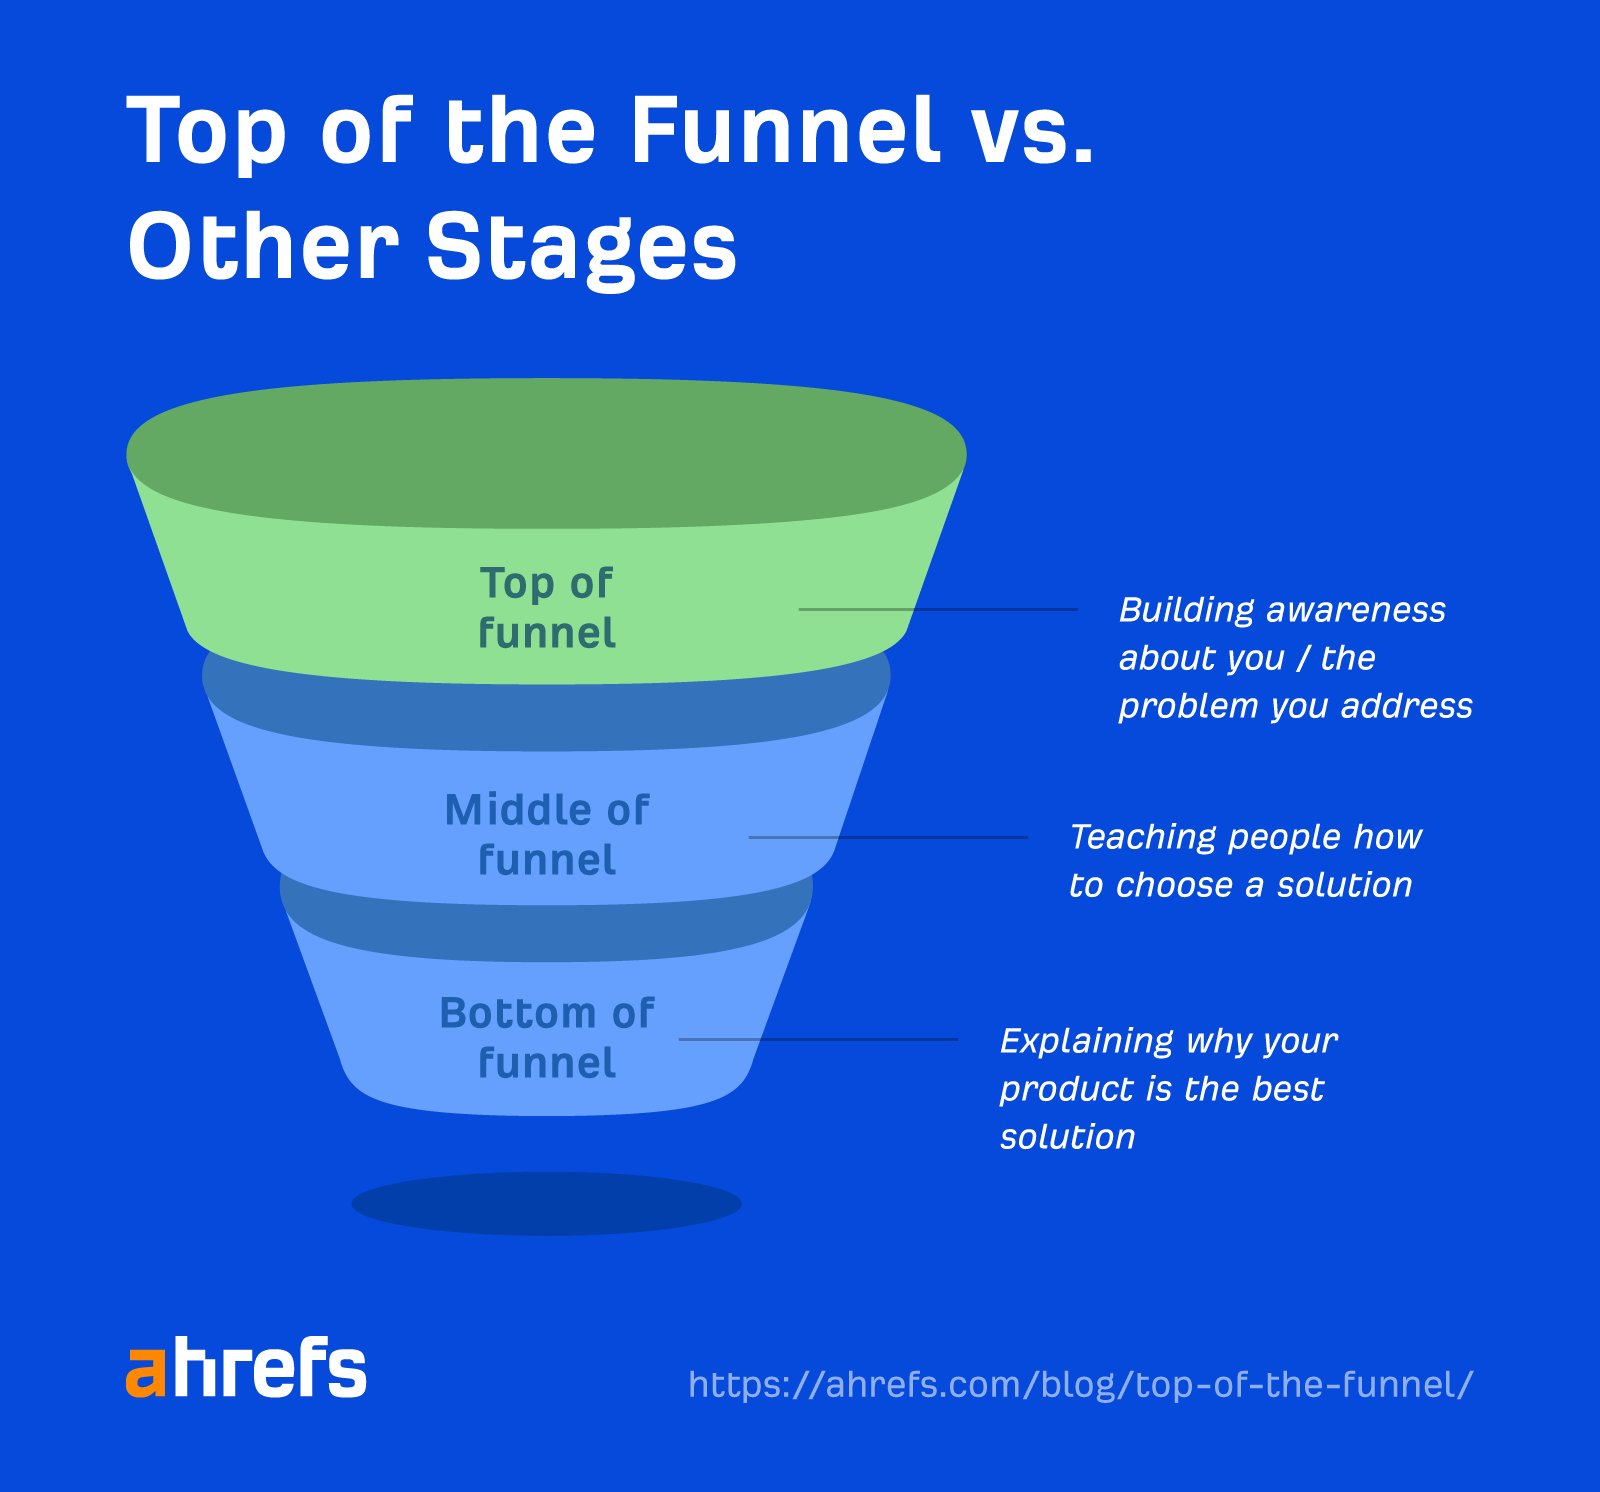 Top-of-the-Funnel Marketing Explained: How to Attract Customers |